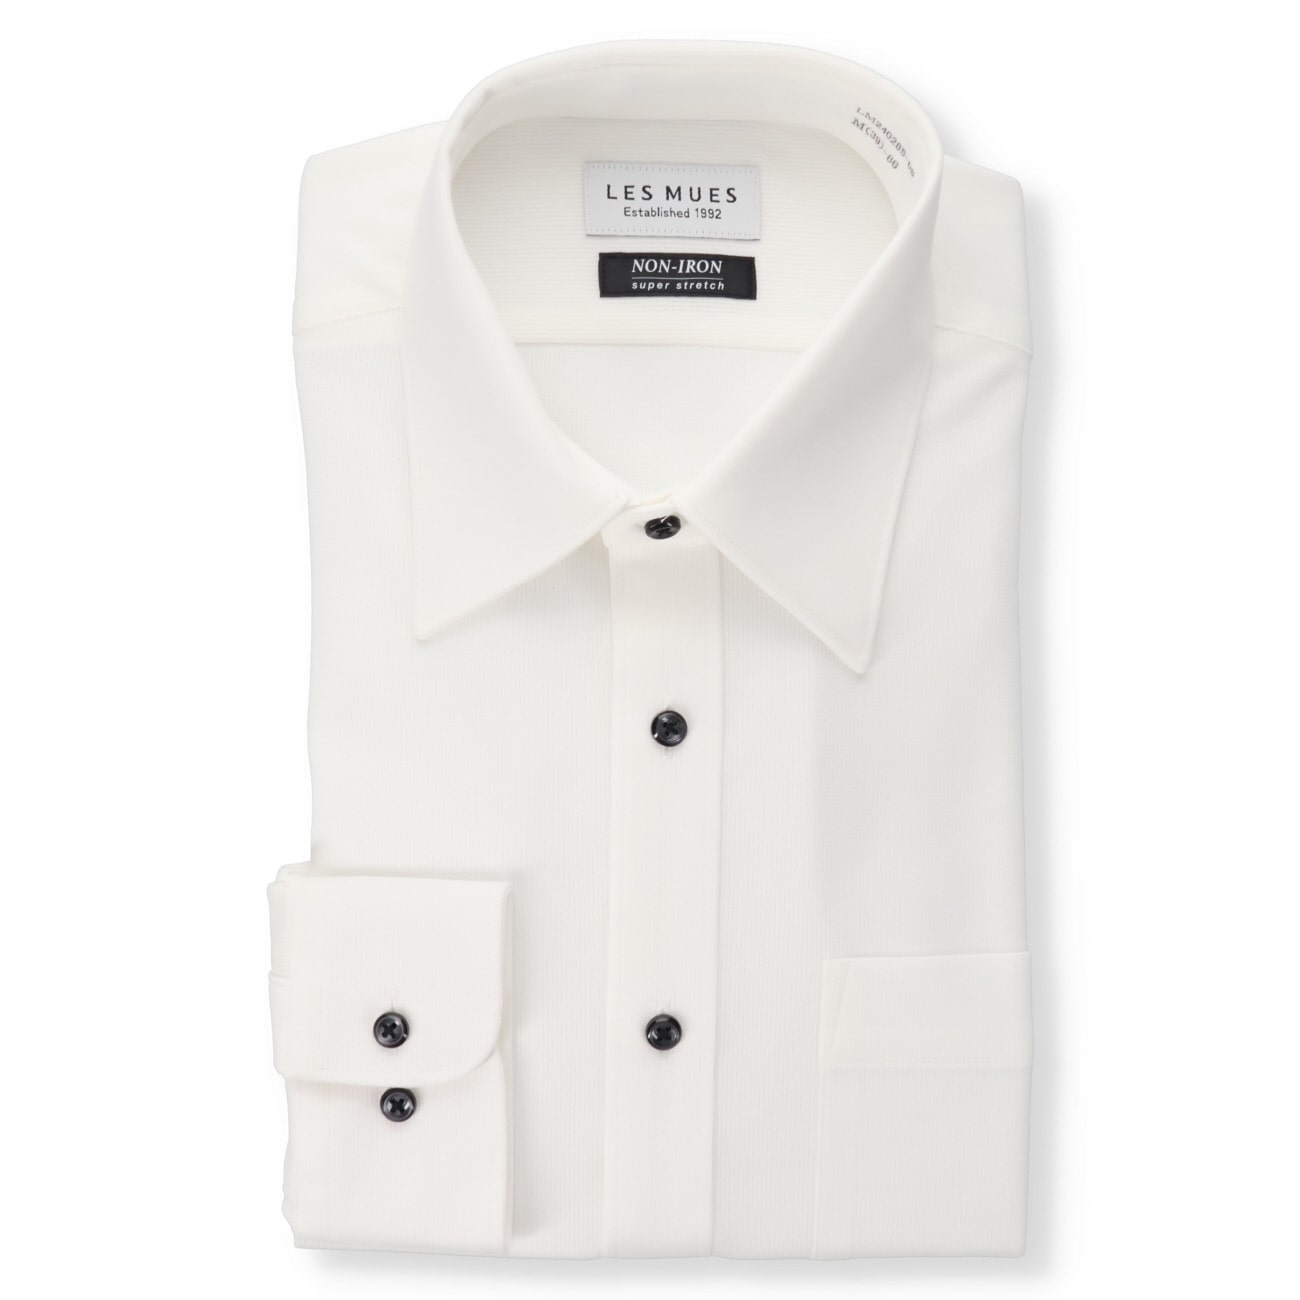 LES MUES Non-iron Super Stretch White Regular Collar Shirt - Regular fit [Recycled Material]